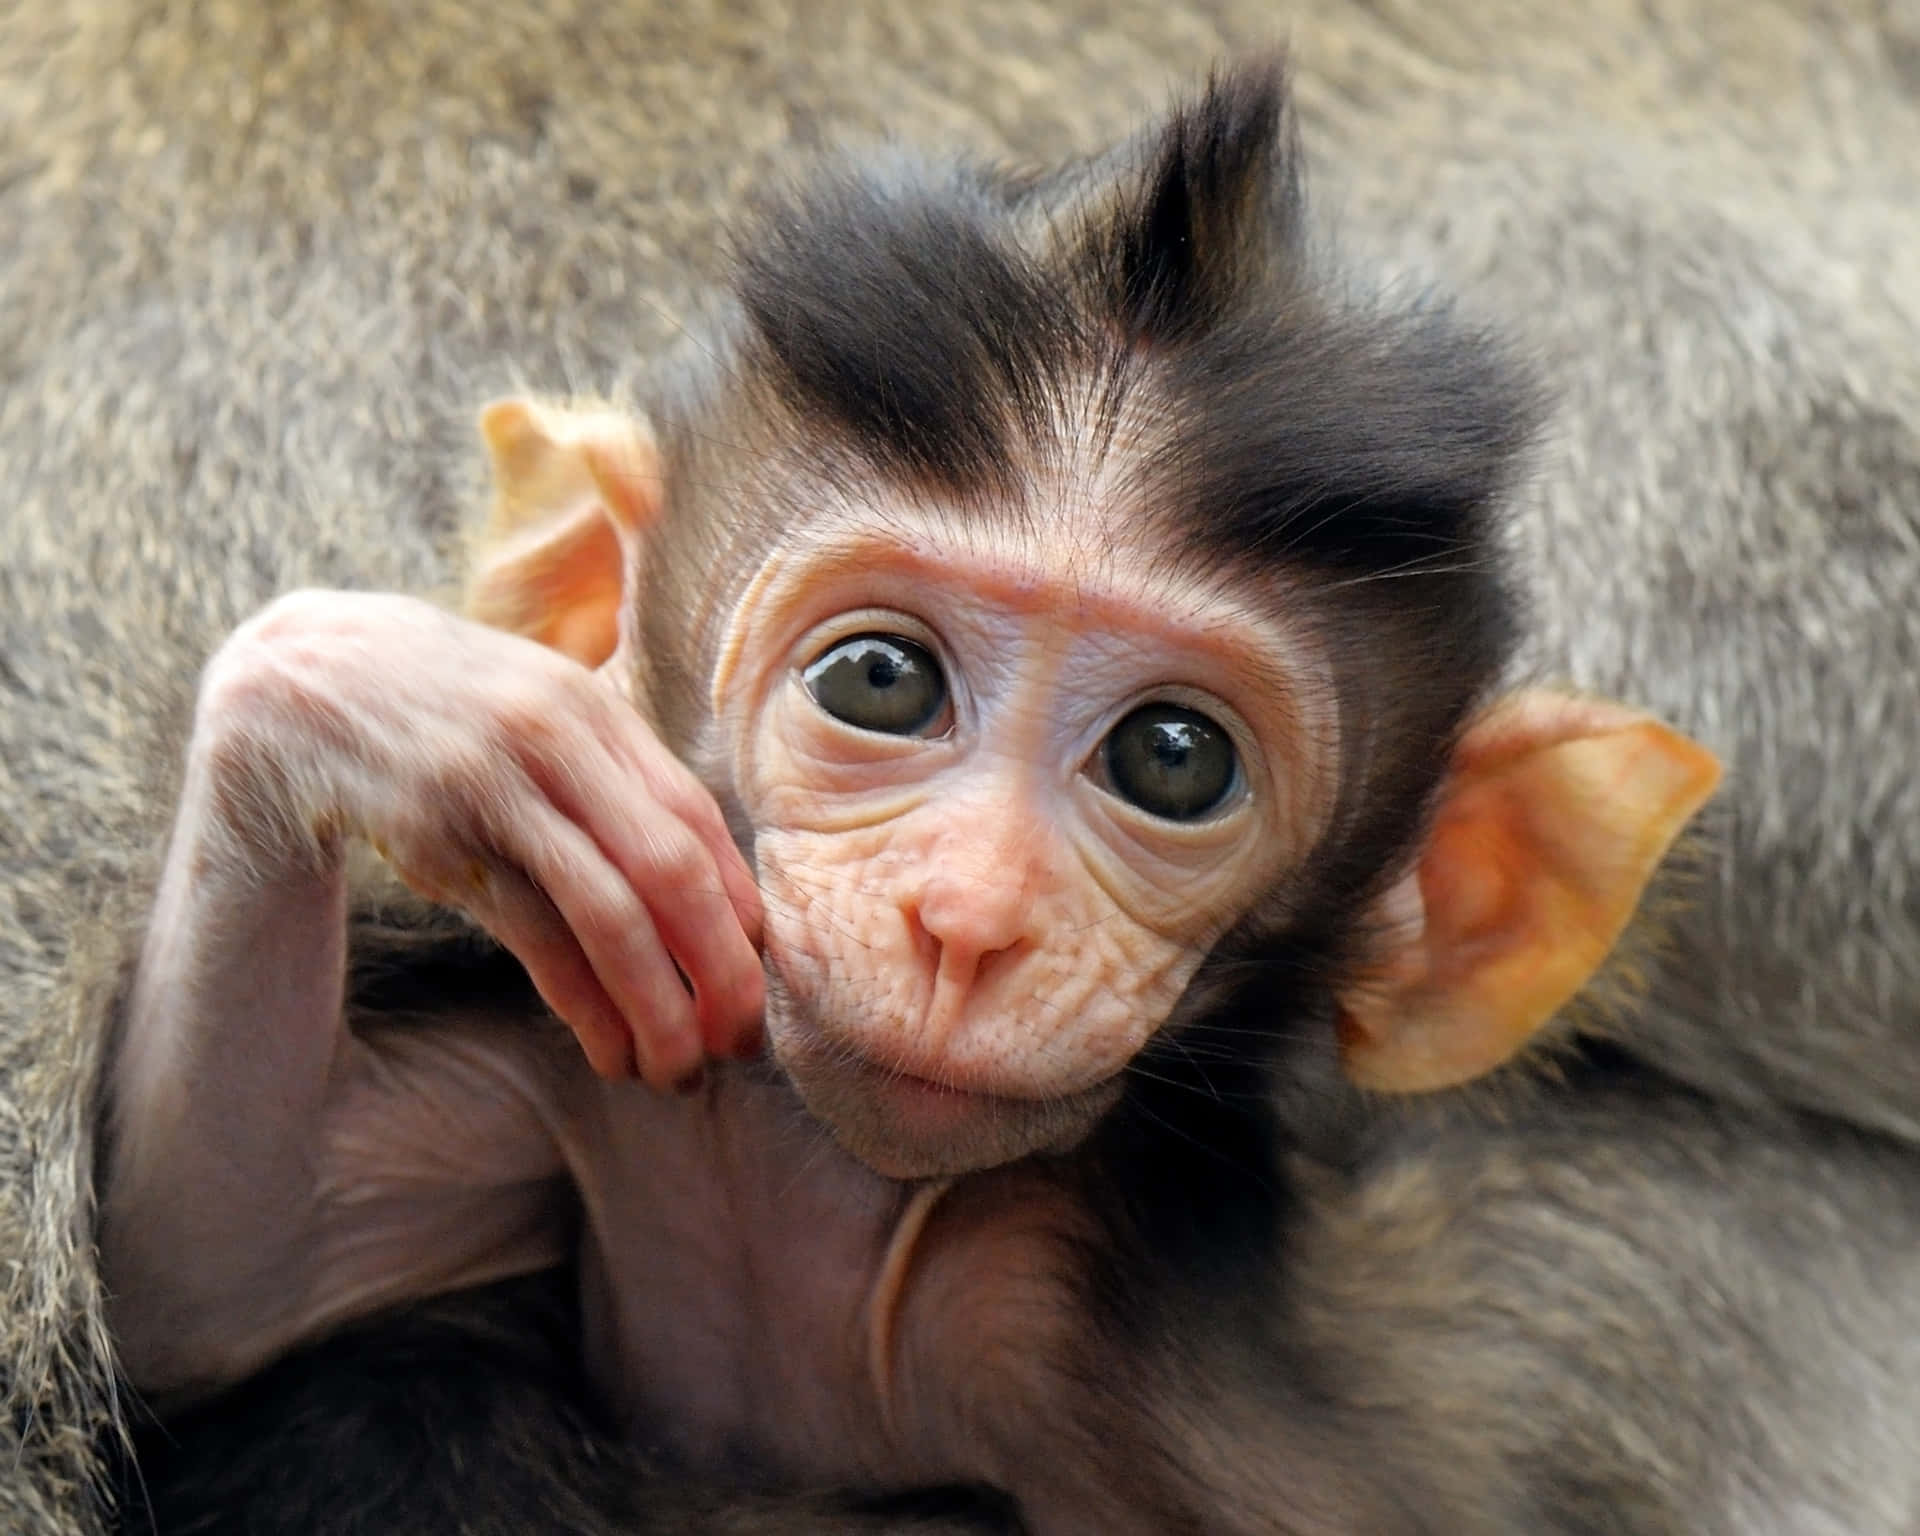 A sweet baby monkey pauses to take in the world around it.